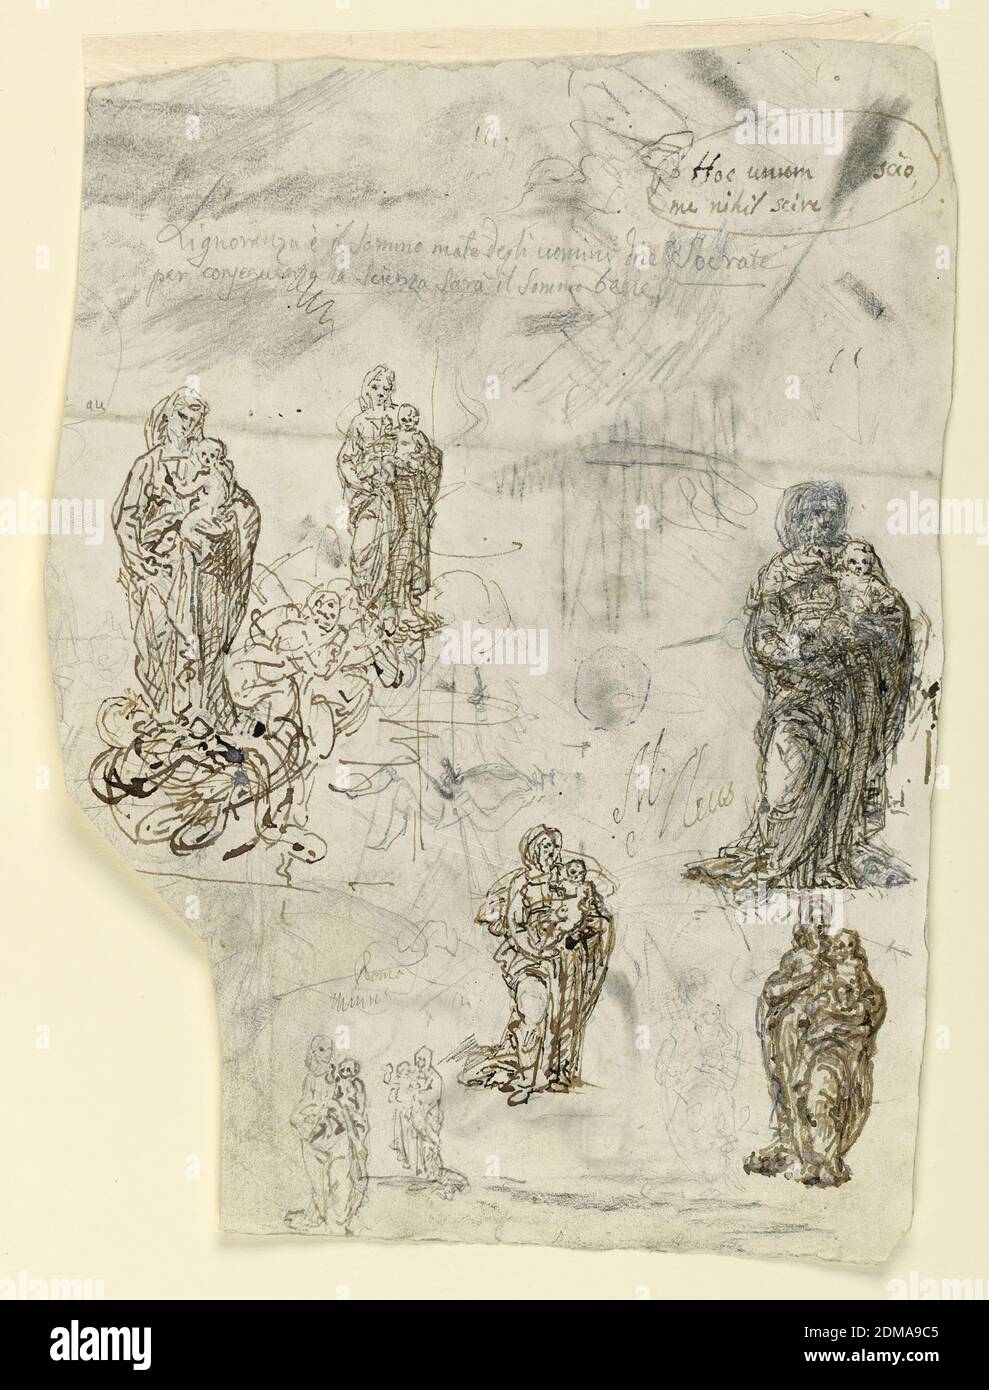 Sketches, Virgin and Child, Fortunato Duranti, Italian, 1787 - 1863, Pen and ink, graphite on paper, Various sketches depicting the Virgin and Child., Rome, Italy, 1820–1850, Drawing Stock Photo